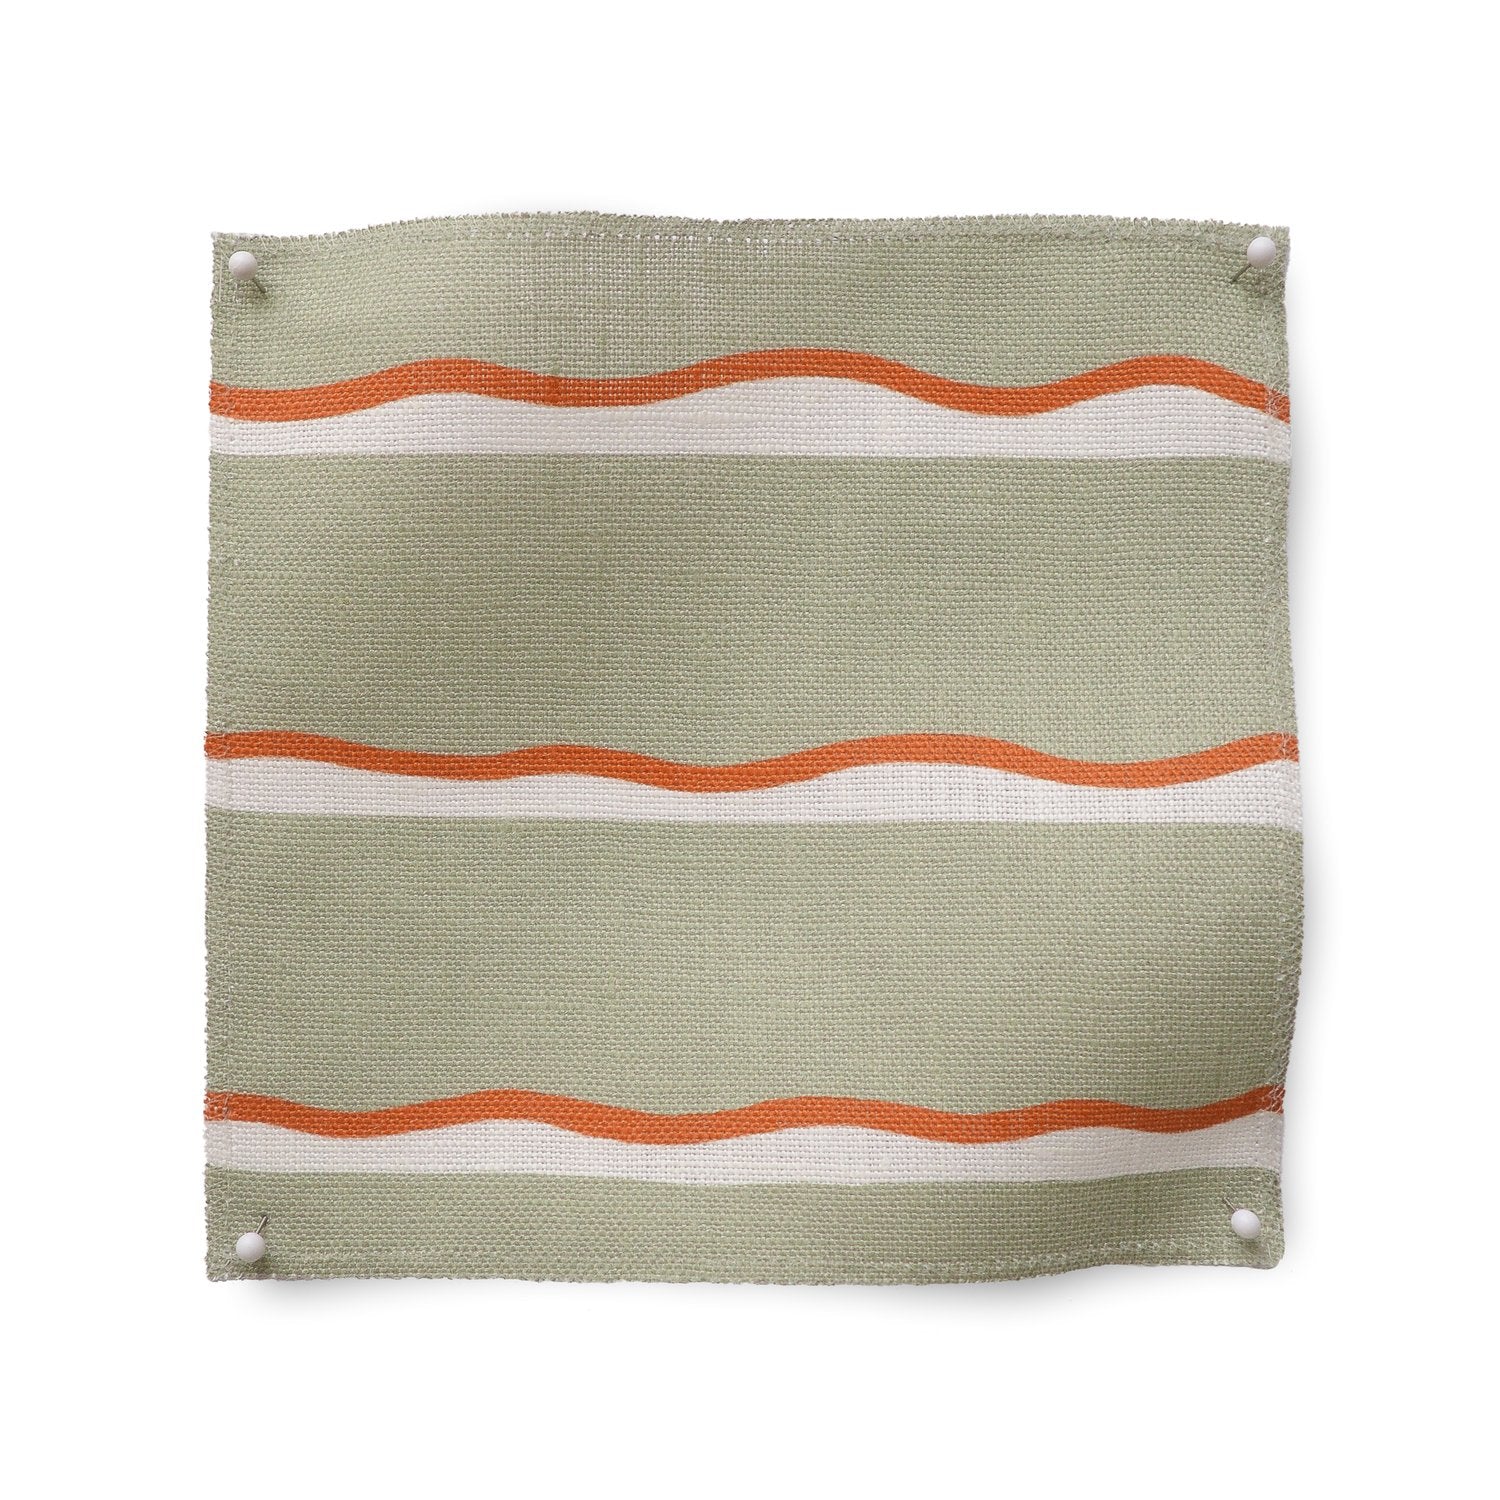 Square fabric swatch in a wide undulating stripe pattern in coral and white on a light green field.